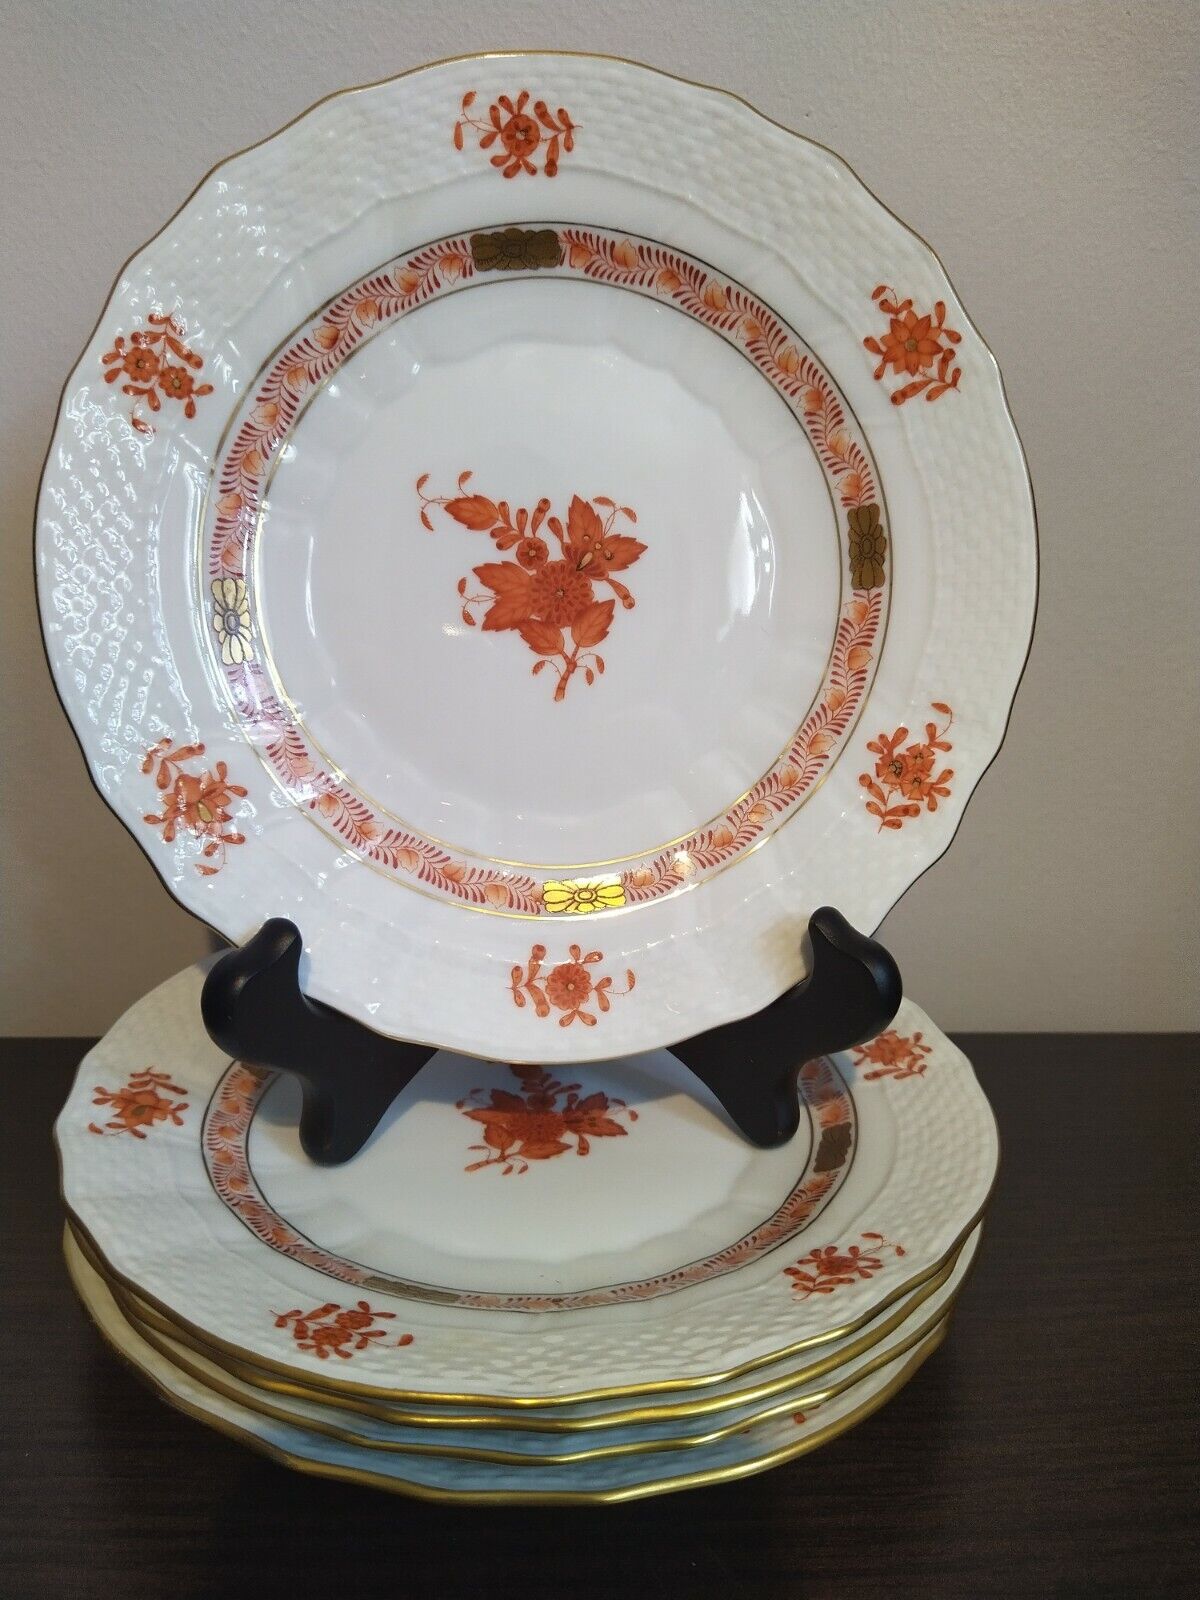 Herend Hvngary Plate Porcelain Chinese Bouquet: 7